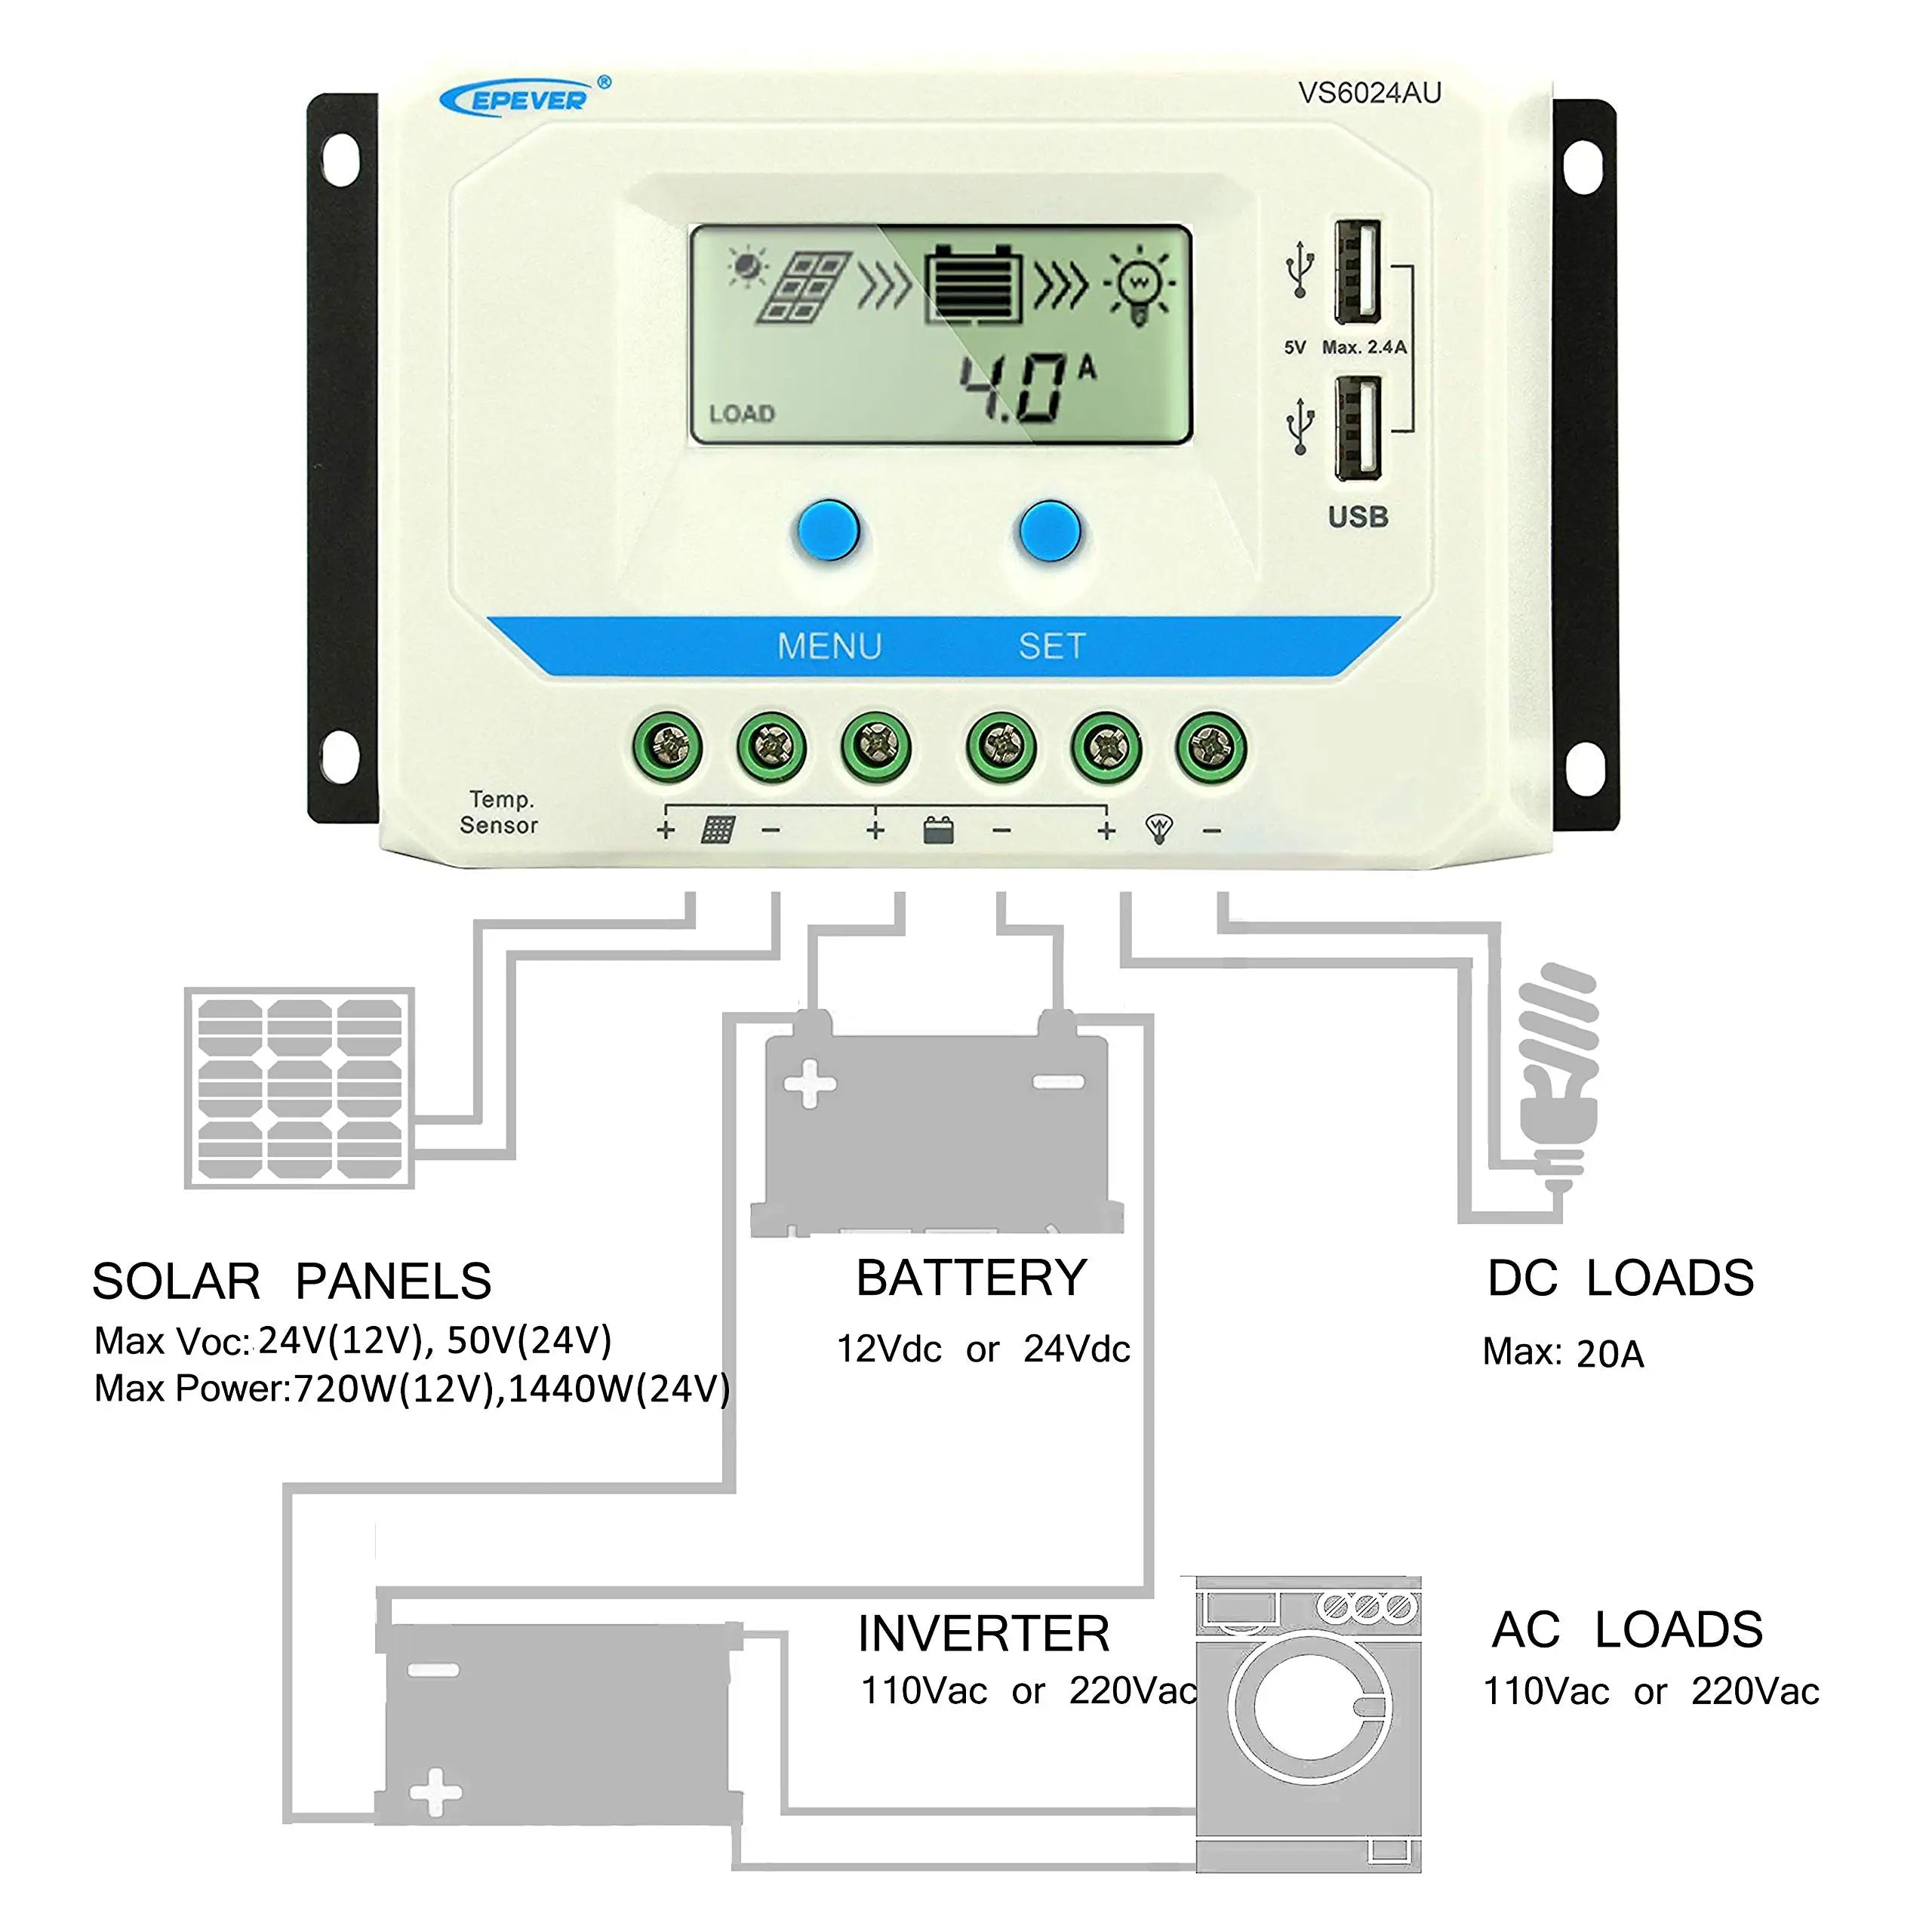 Solar charge controller with max input voltage 12/24V, supports up to 9 panels, and includes LCD display and USB ports.